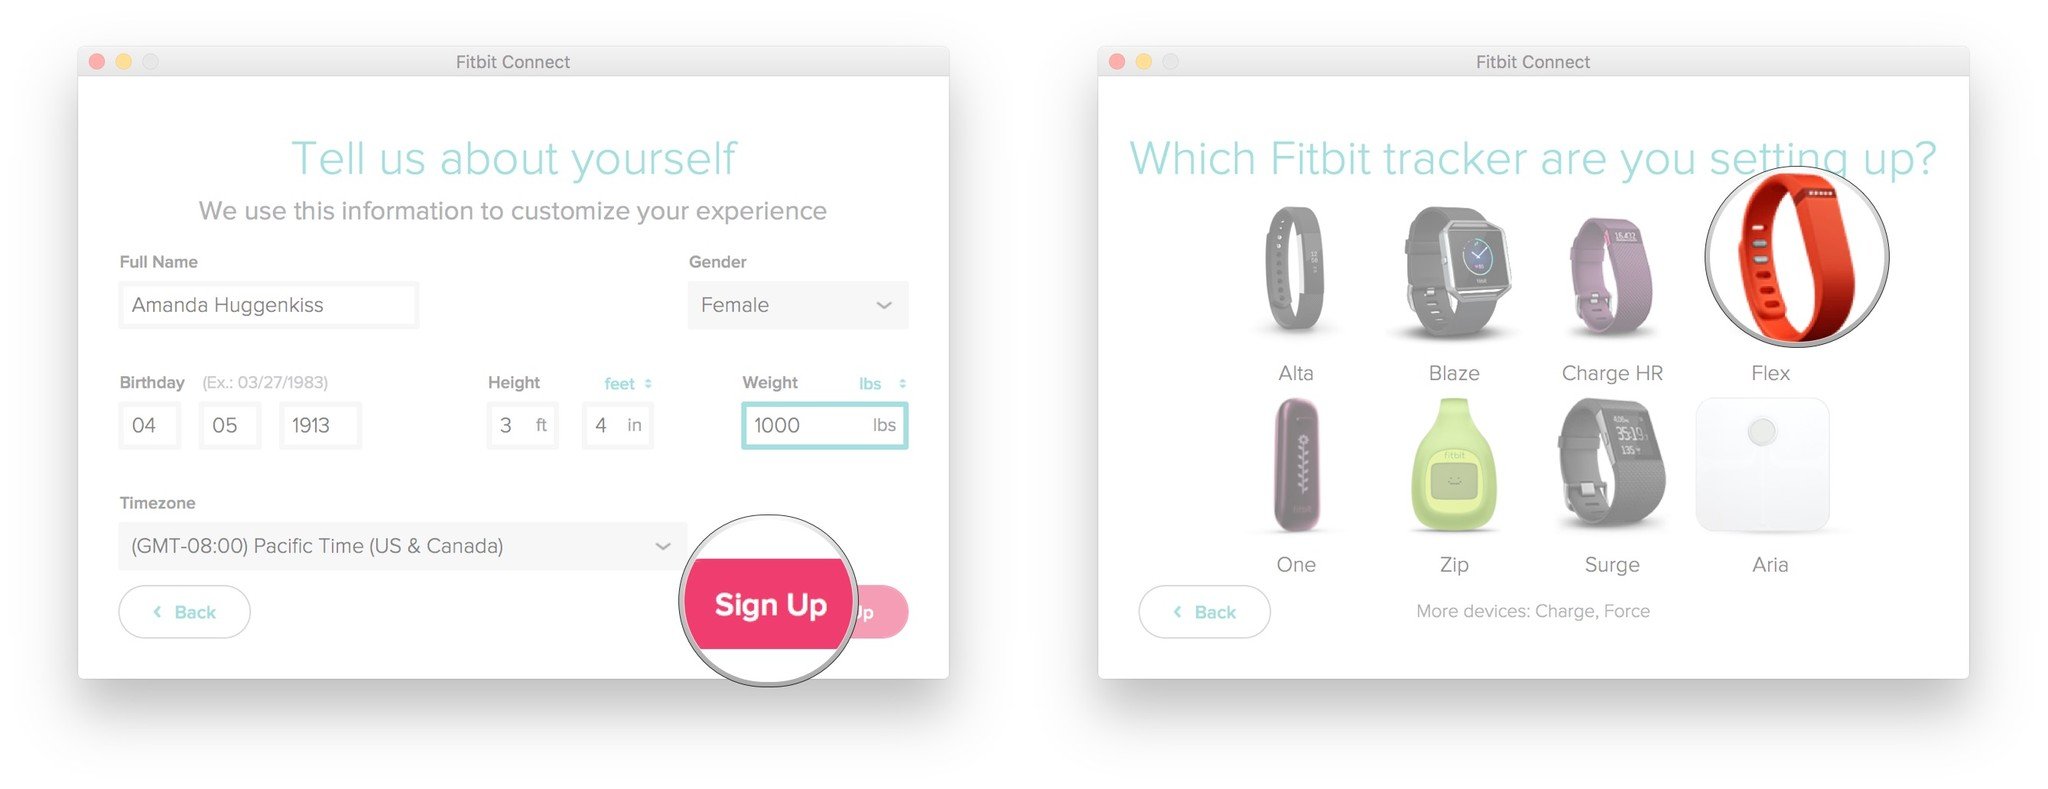 Fitbit personal information screen and Select Fitbit tracker screen.